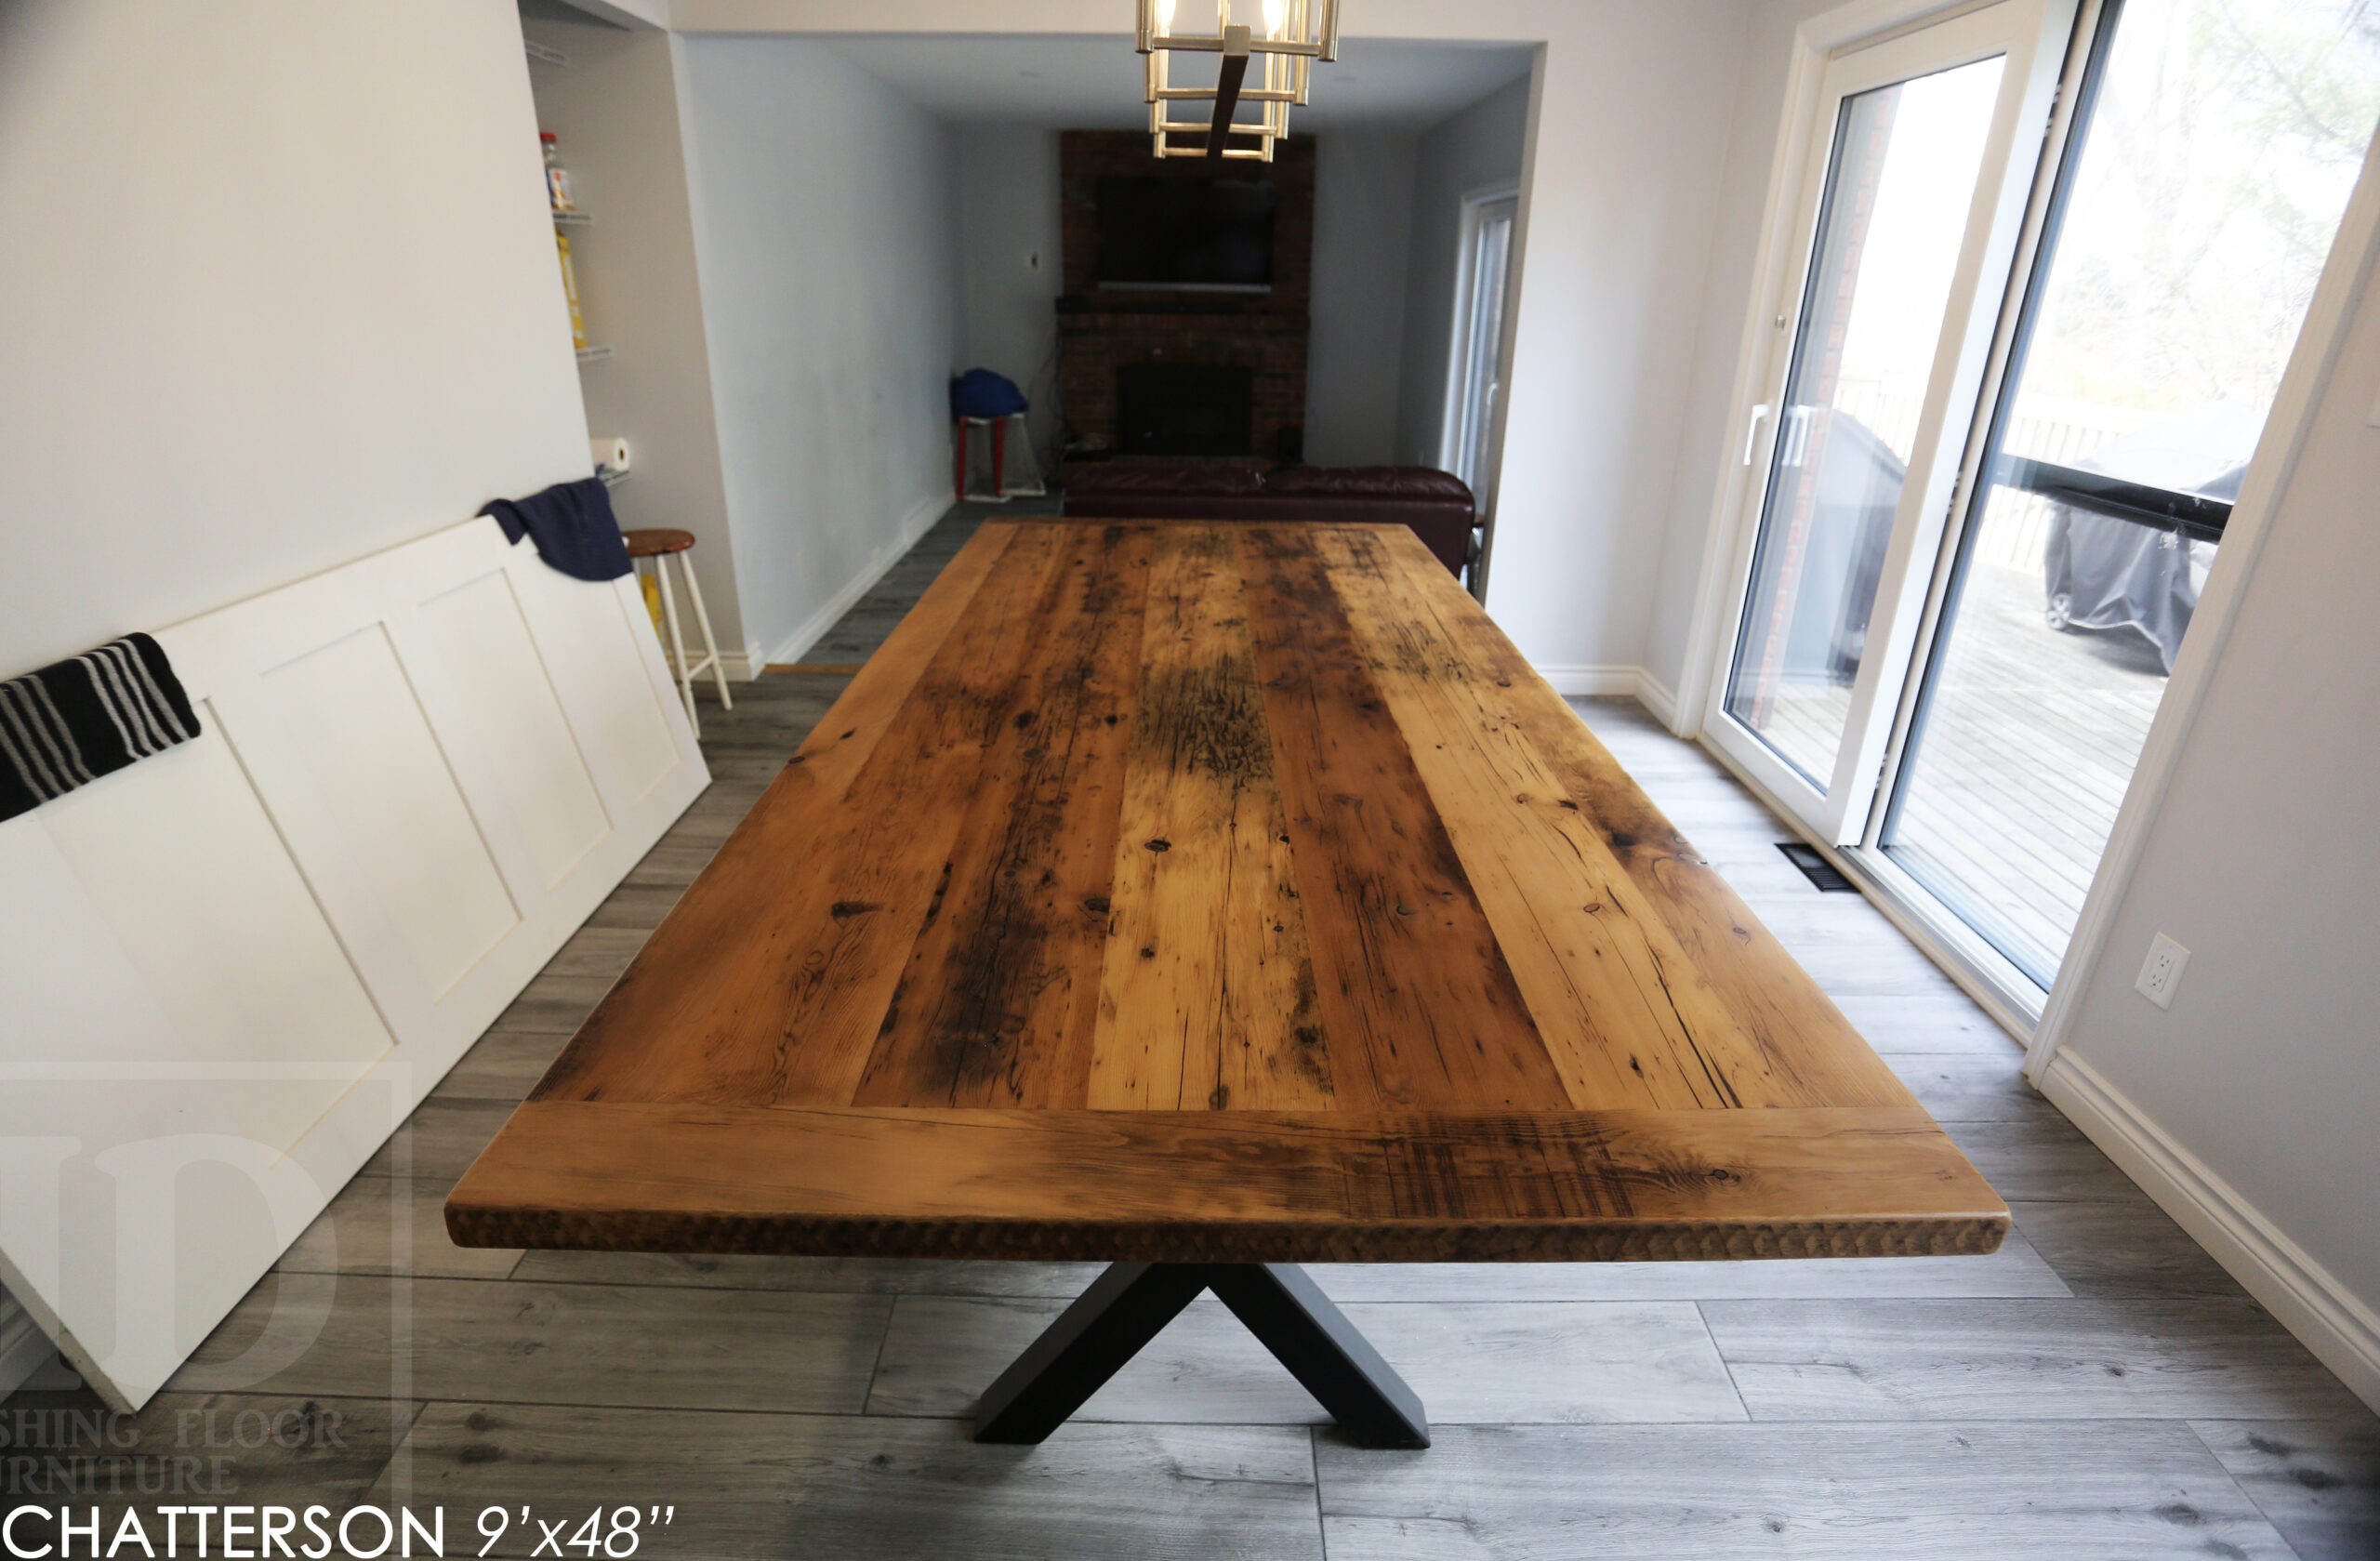 9' Reclaimed Wood Table for an Ancaster home - 48" wide - Hemlock Threshing Floor 2" Barnwood Top - Black X Shaped Metal Base - Original edges & distressing maintained - Premium epoxy + matte polyurethane finish - Greytone Treatment Option to maintain colour of unfinished - www.table.ca